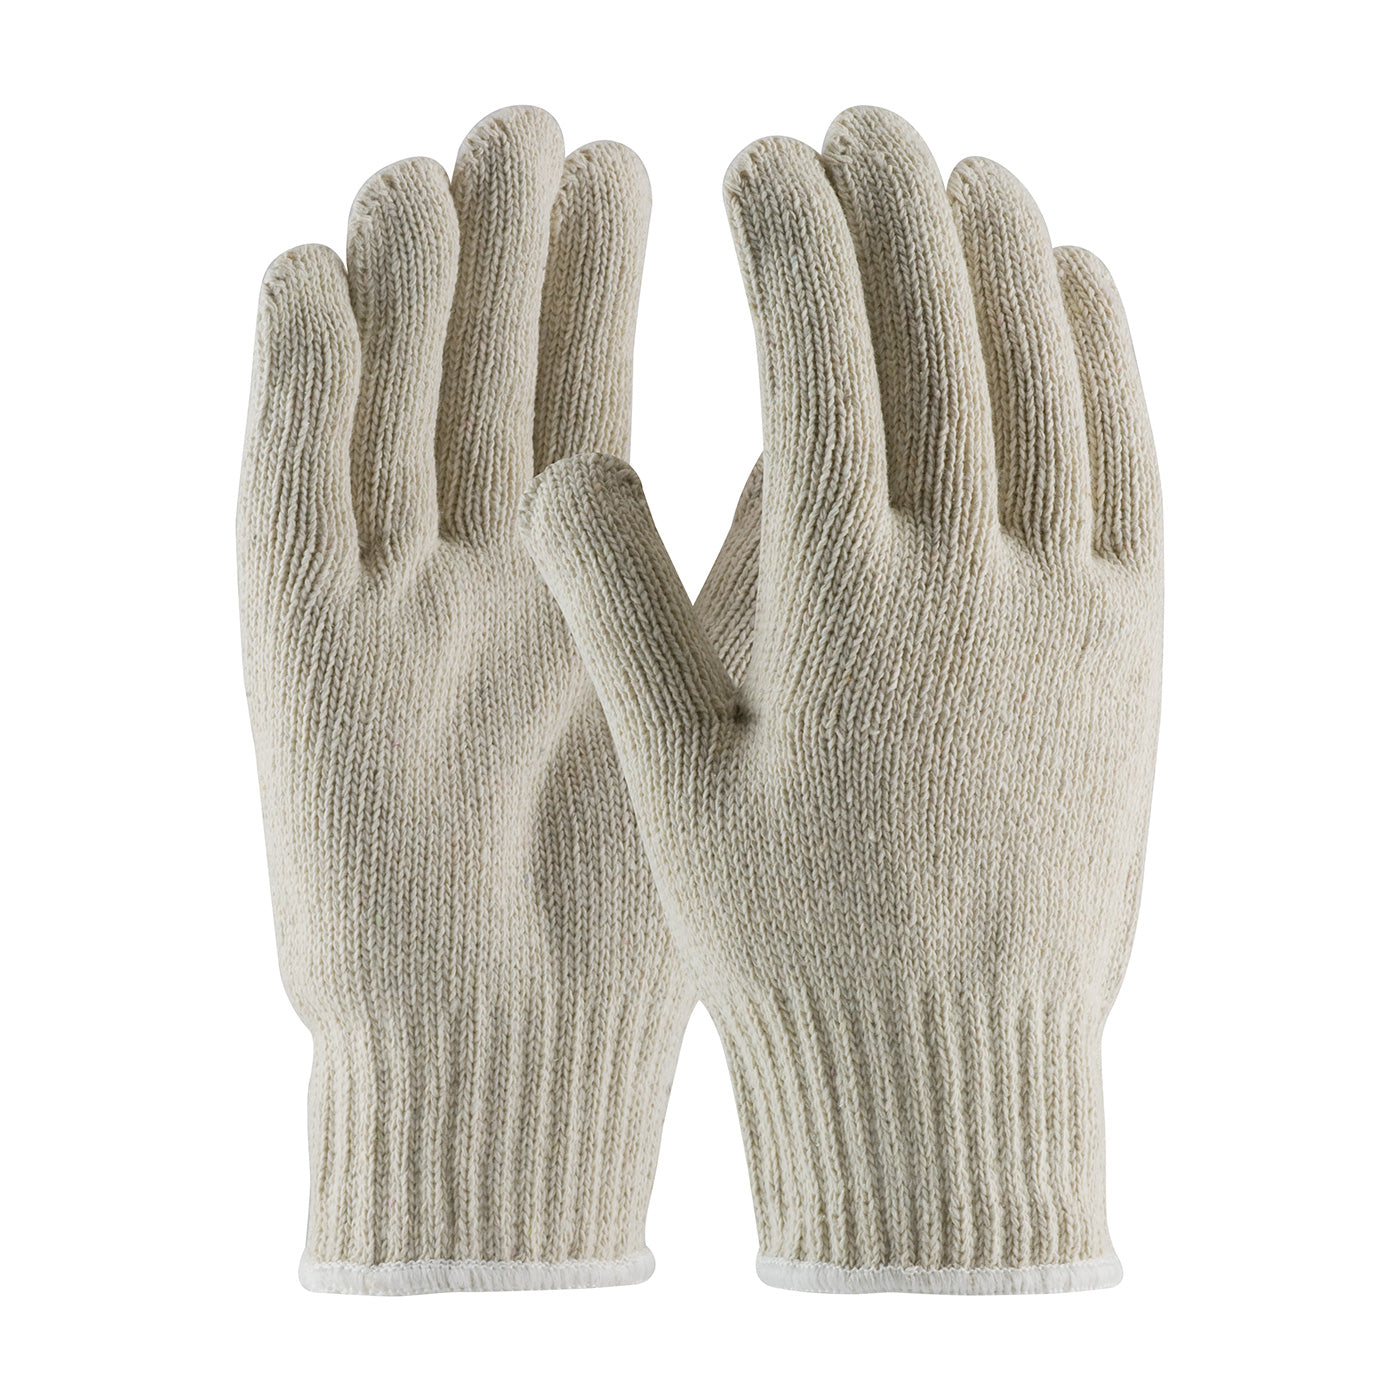 PIP 35-C510/L Extra Heavy Weight Seamless Knit Cotton/Polyester Glove - Natural